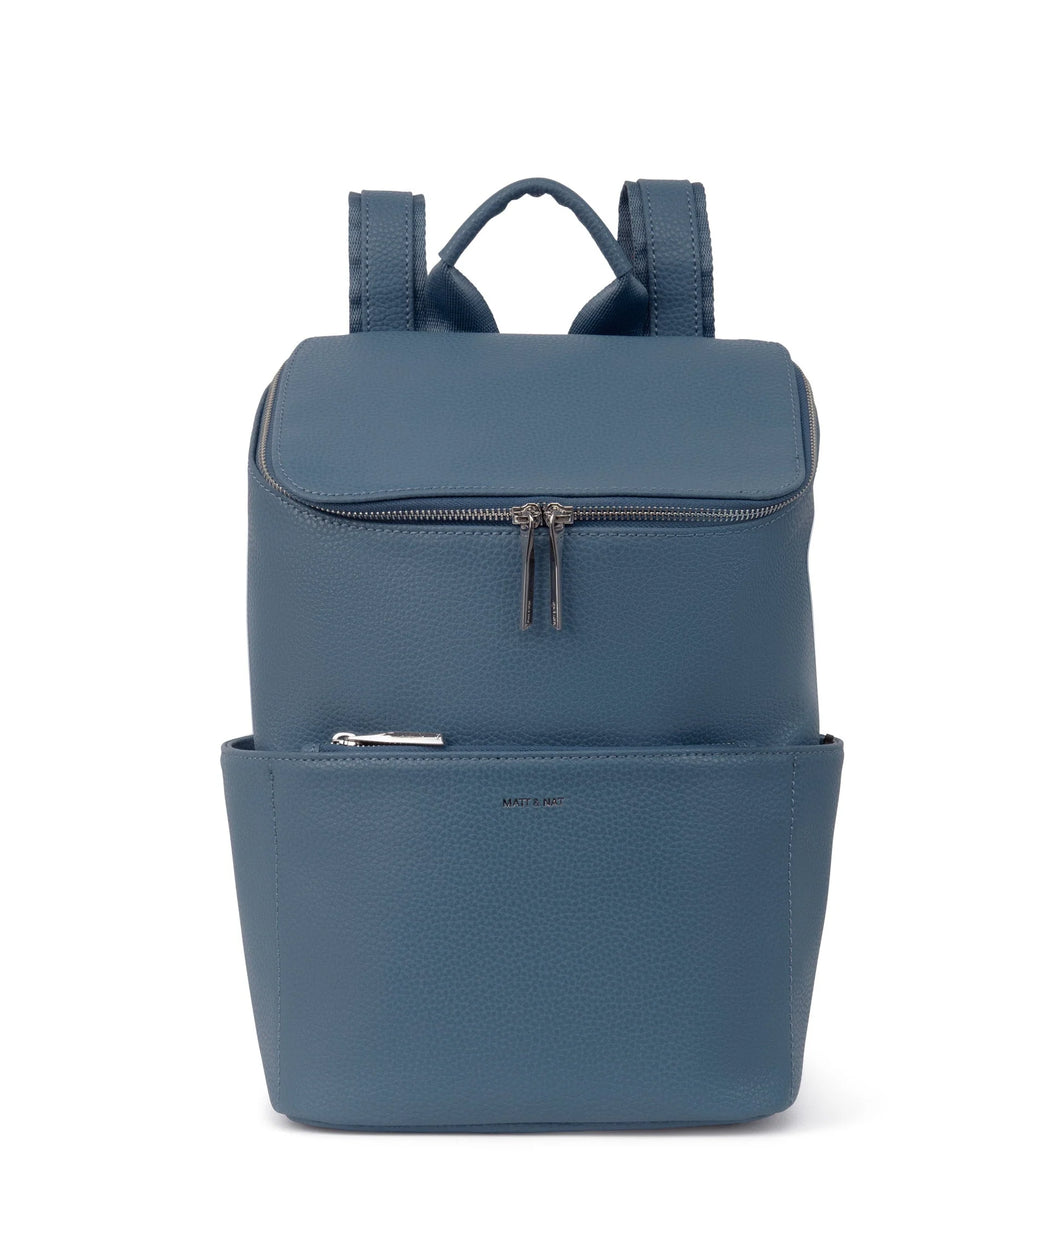 BRAVE PURITY BACKPACK IN GALAXY